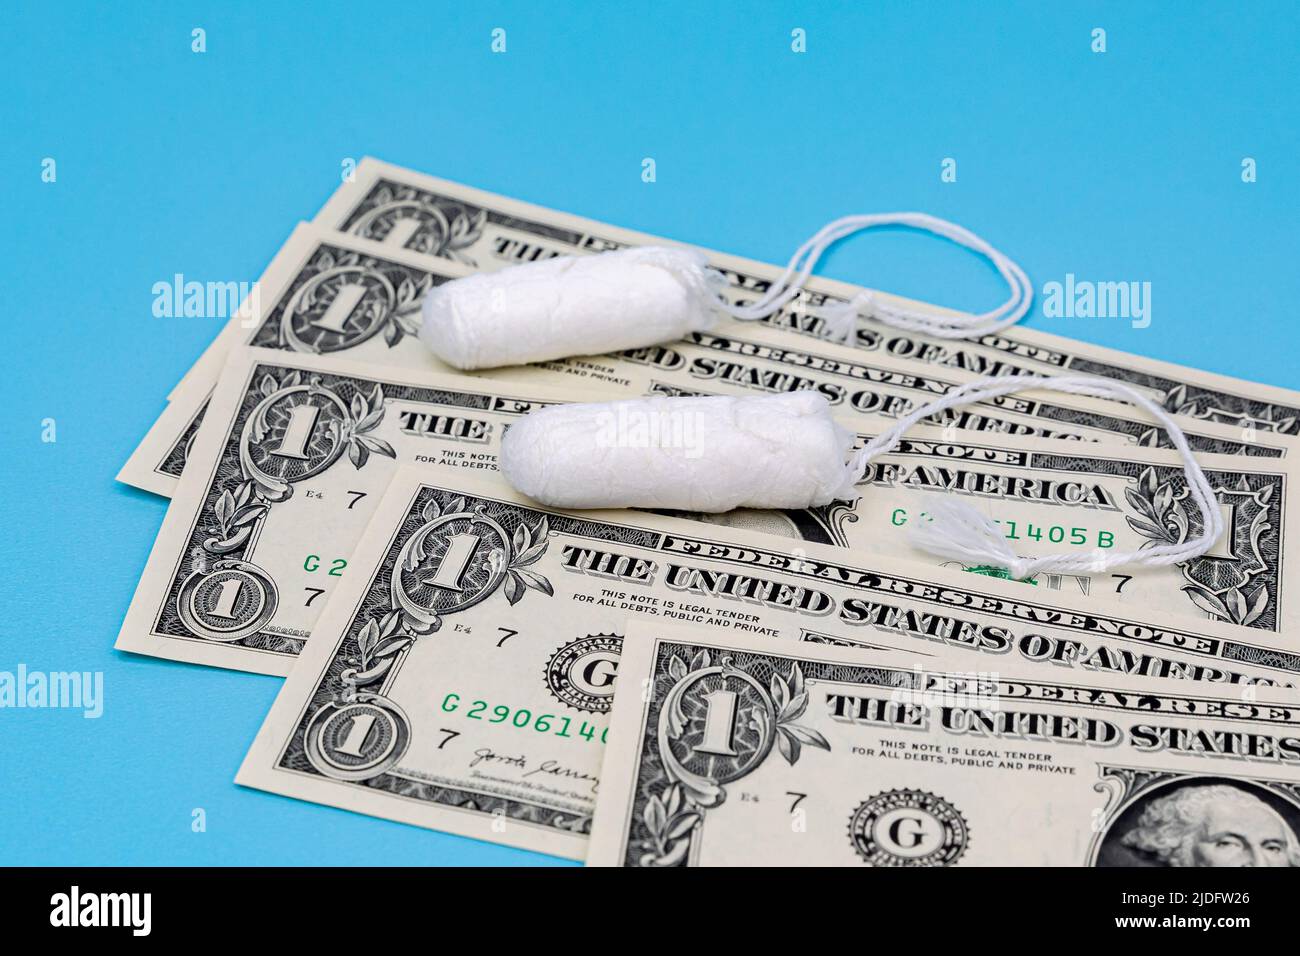 Tampons and cash money. Tampon shortage, tax, pink tax and feminine hygiene products price increase concept Stock Photo